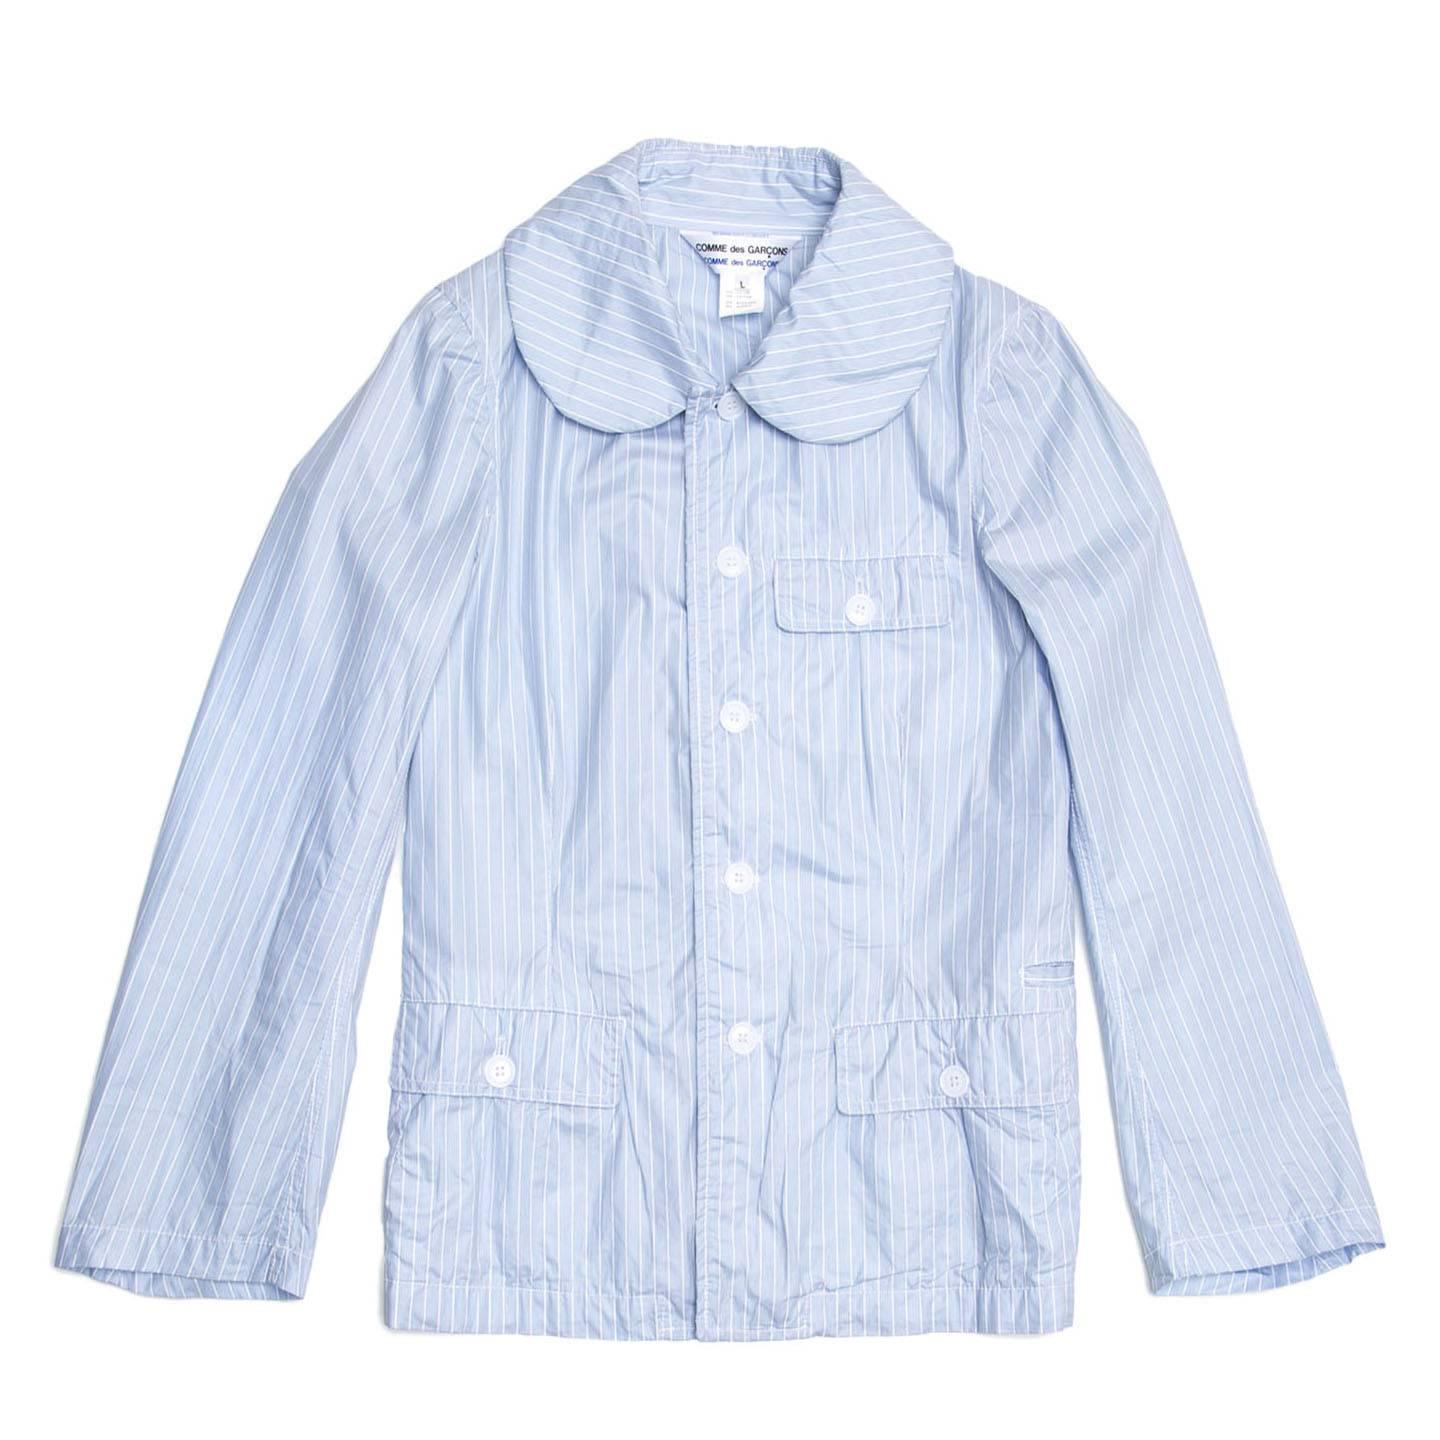 Blue and white stripy cotton blend slicker jacket. The peter pan collar is quite wide and three flap pockets with white round buttons and a little slit pocket embellish the front. The length is to the hip, the fit is quite slim with a back